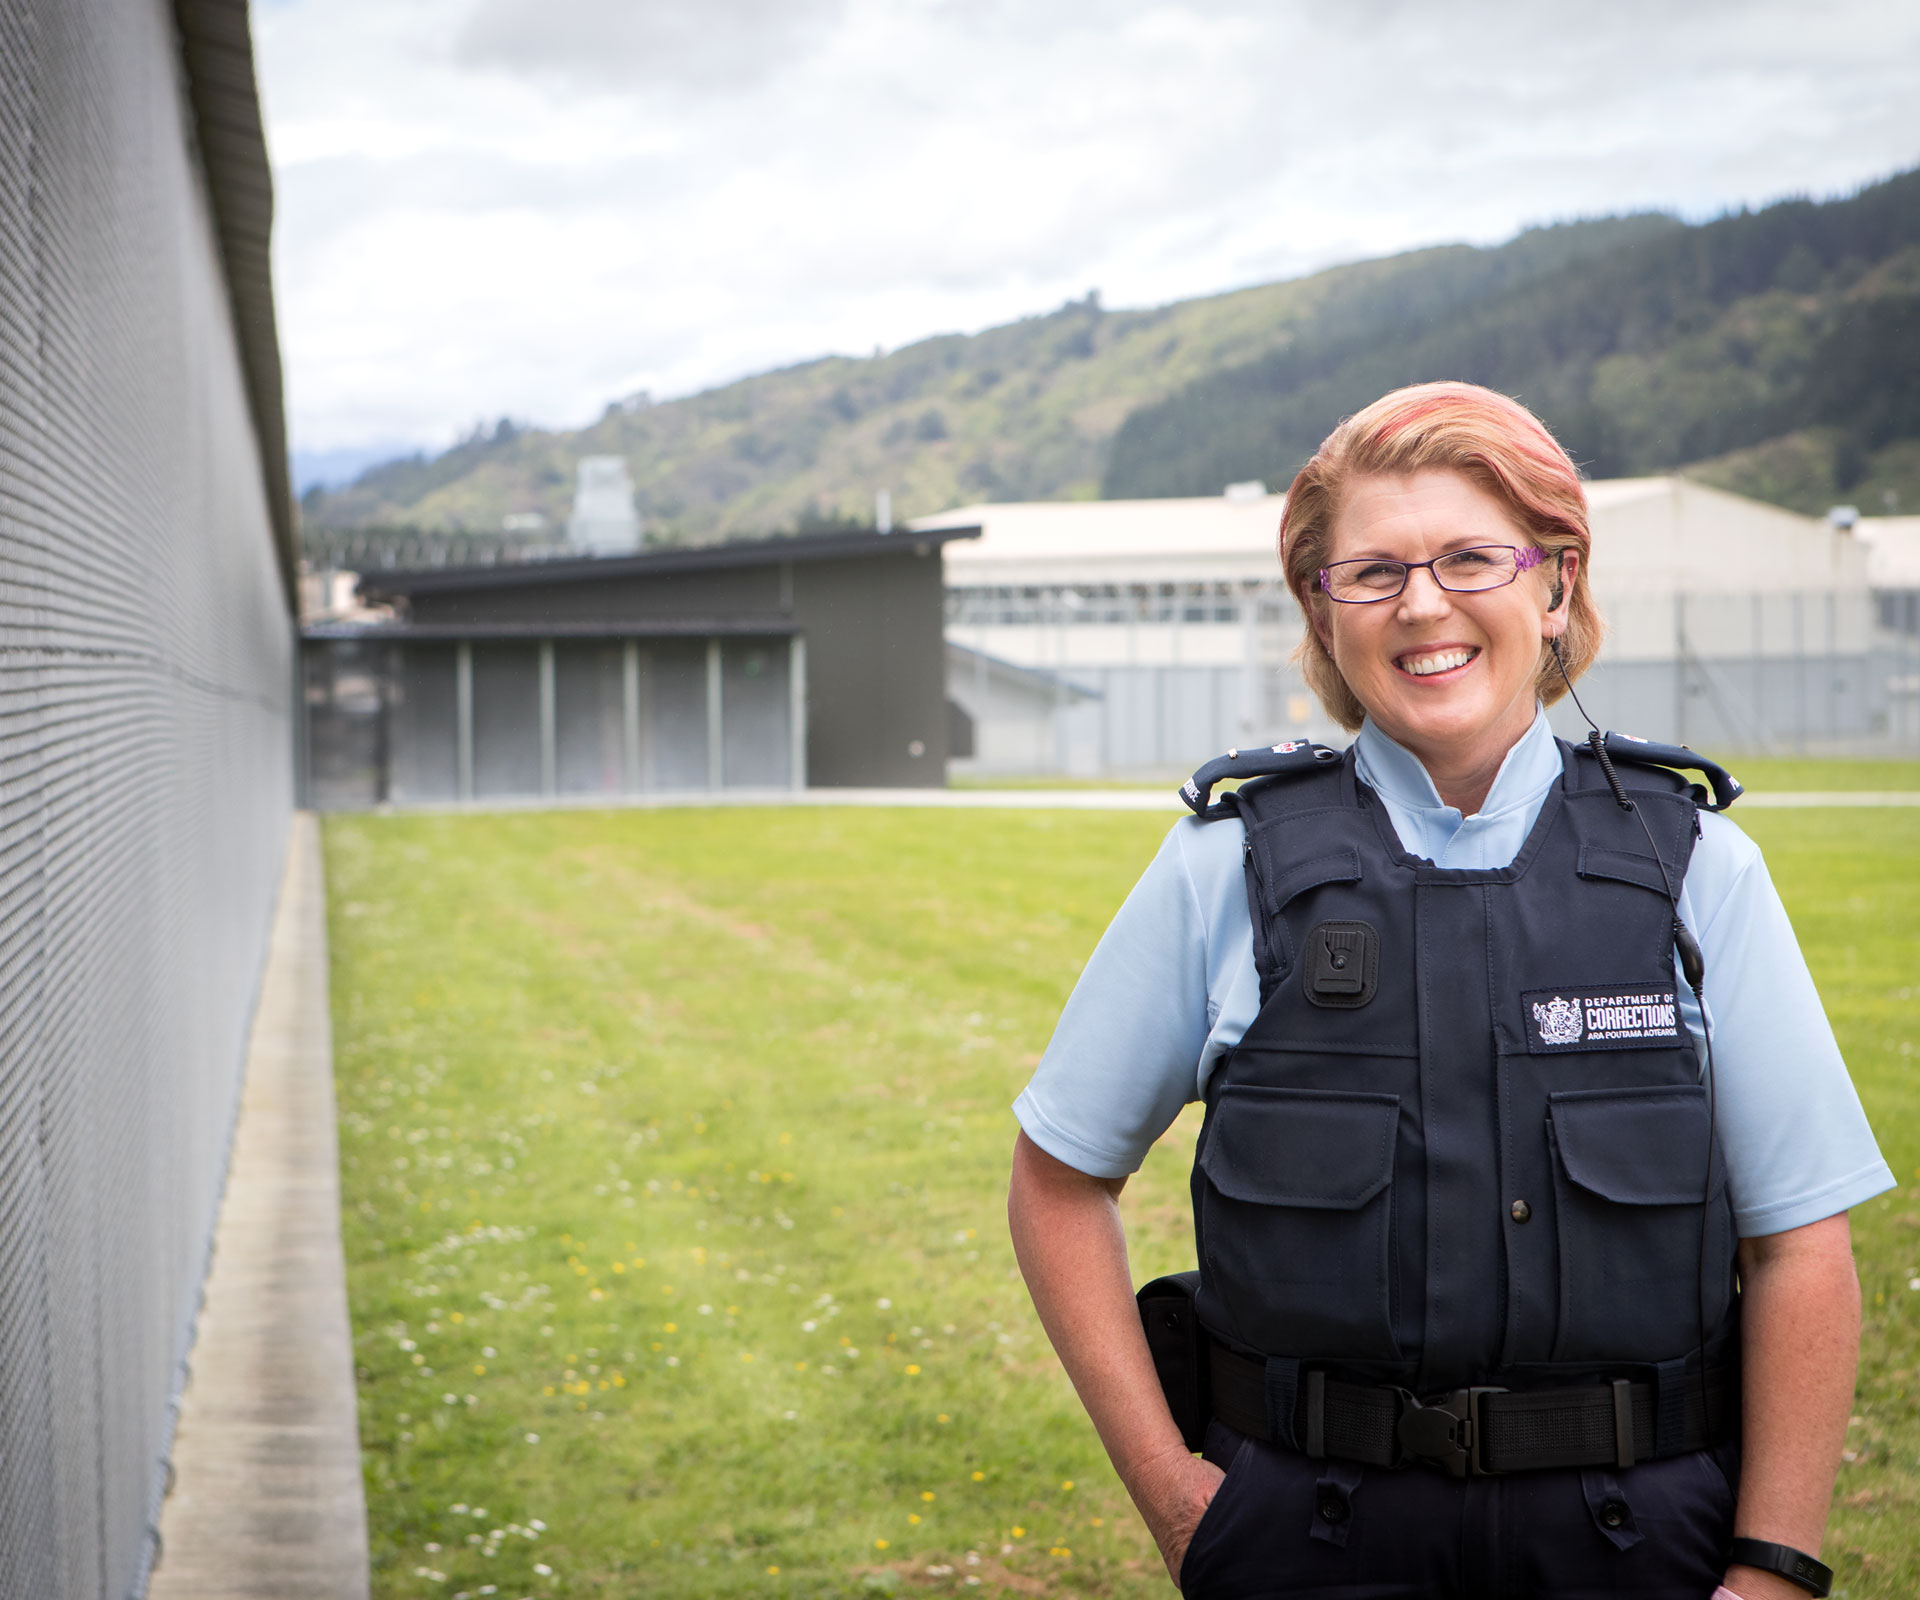 Inside the Wire: Corrections officer on life inside New Zealand’s prisons